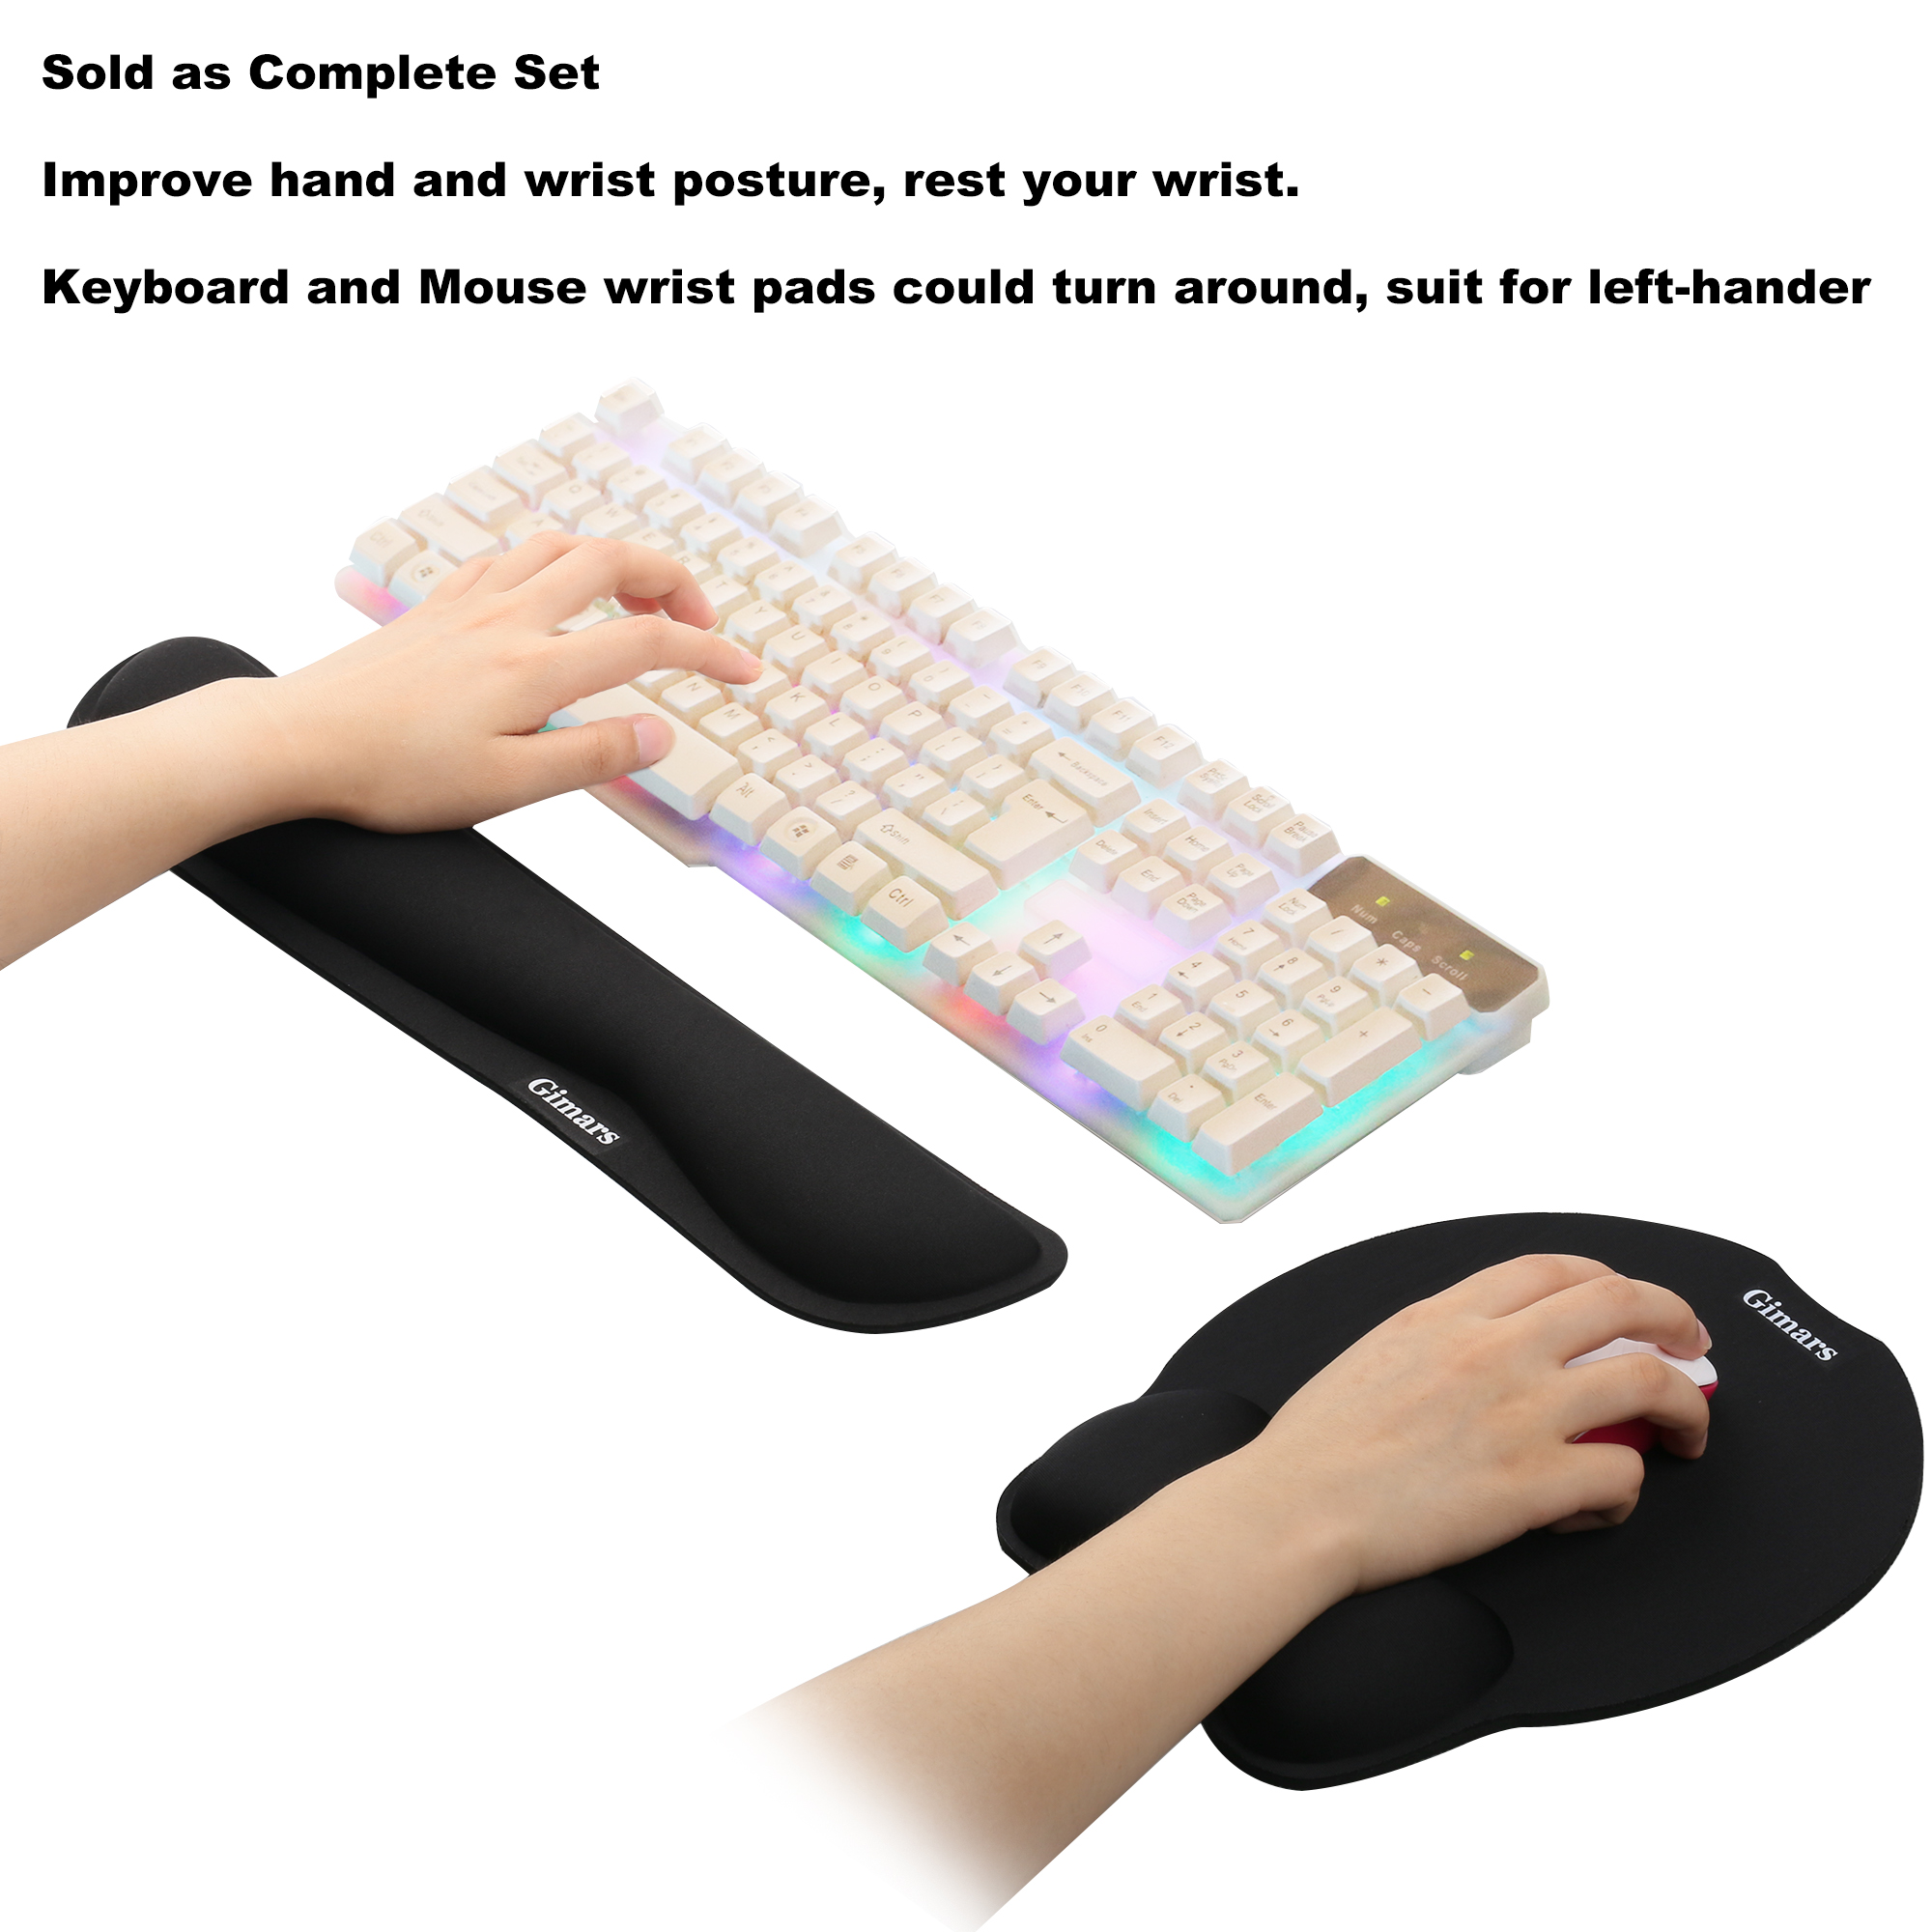 Gimars Upgrade Enlarge Gel Memory Foam Set Keyboard Wrist Rest Pad Lightweight for Easy Typing Pain Relief Laptop Computer Comfortable Mouse Wrist Cushion Support for Office Mac Black